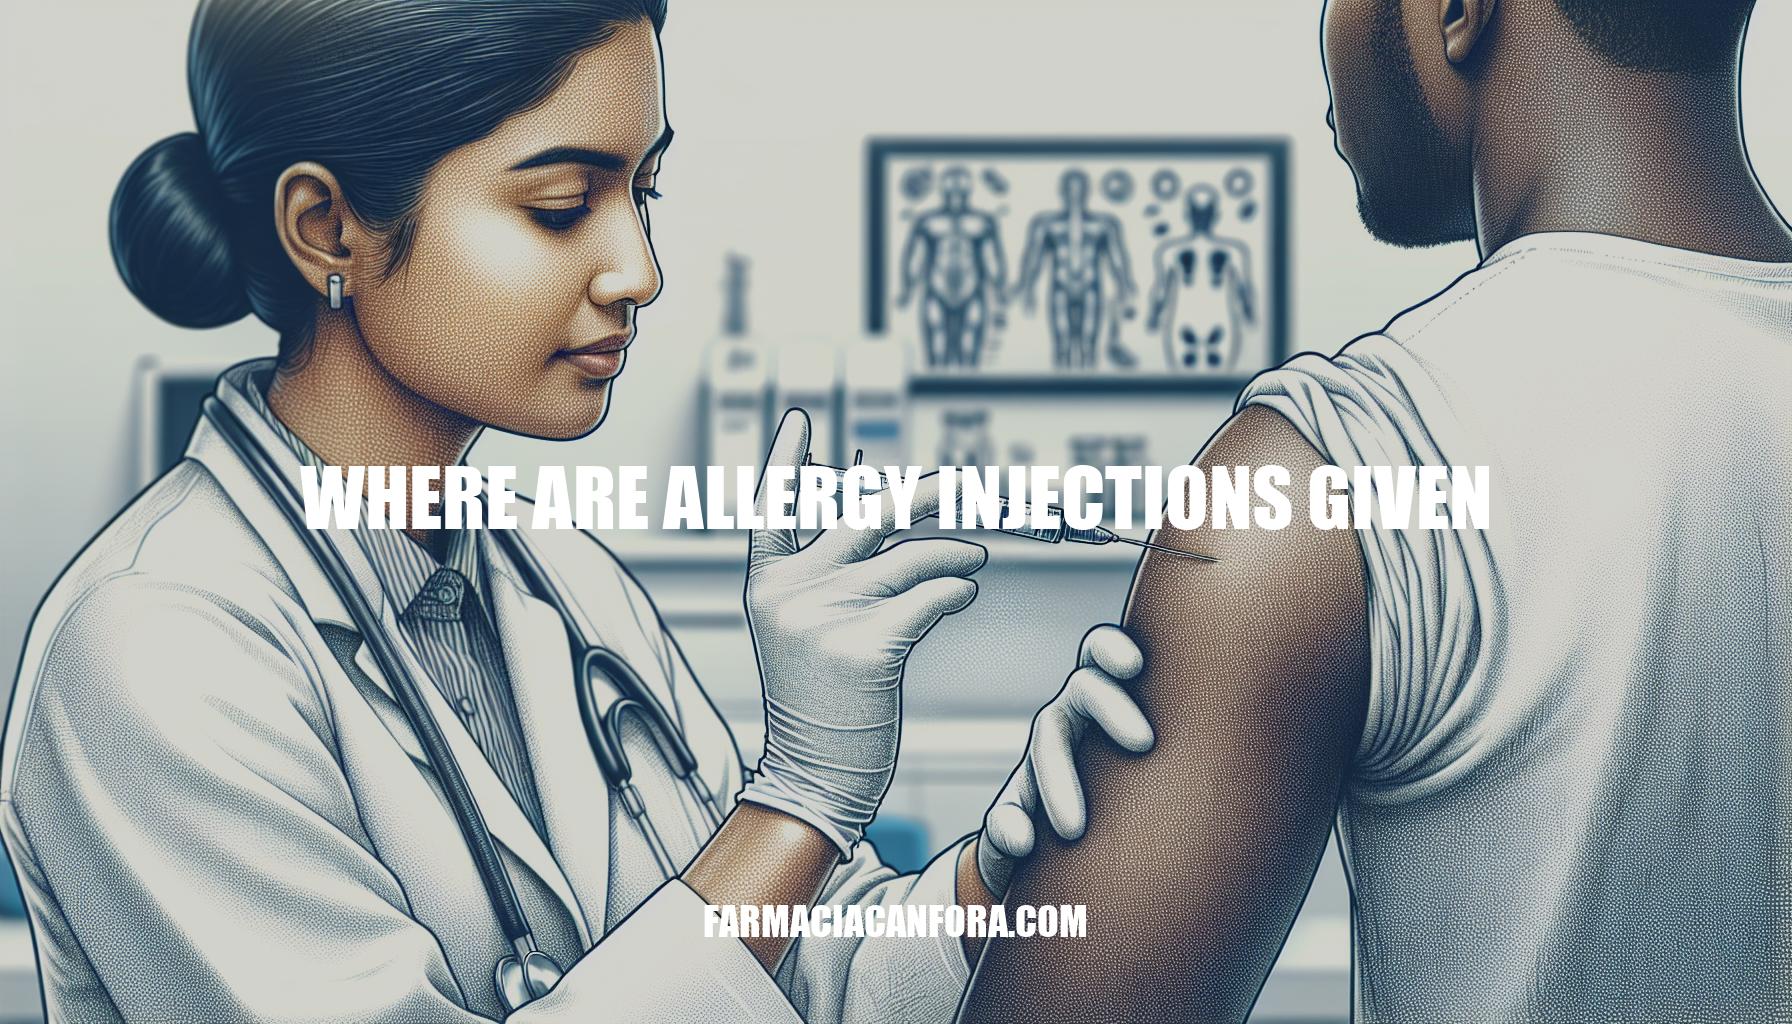 Where Are Allergy Injections Given: Understanding Injection Sites for Allergy Treatments